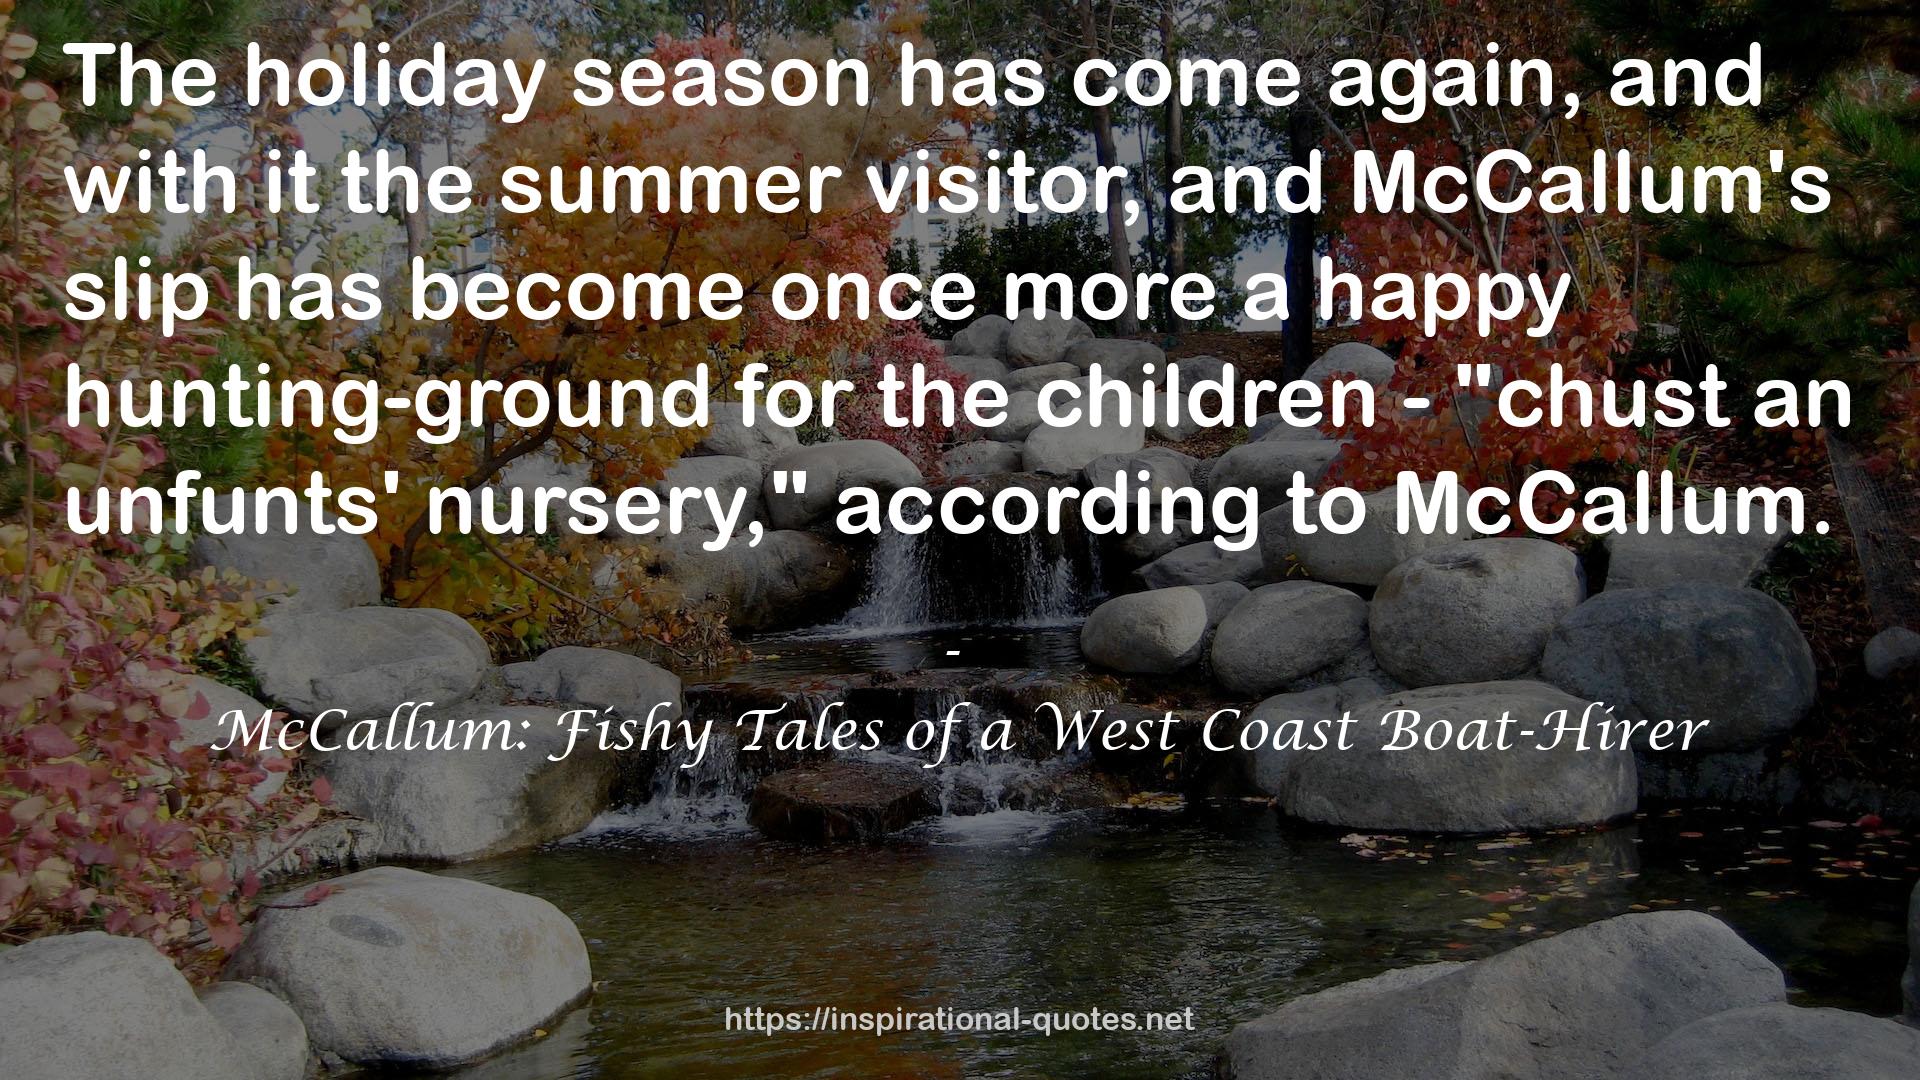 McCallum: Fishy Tales of a West Coast Boat-Hirer QUOTES